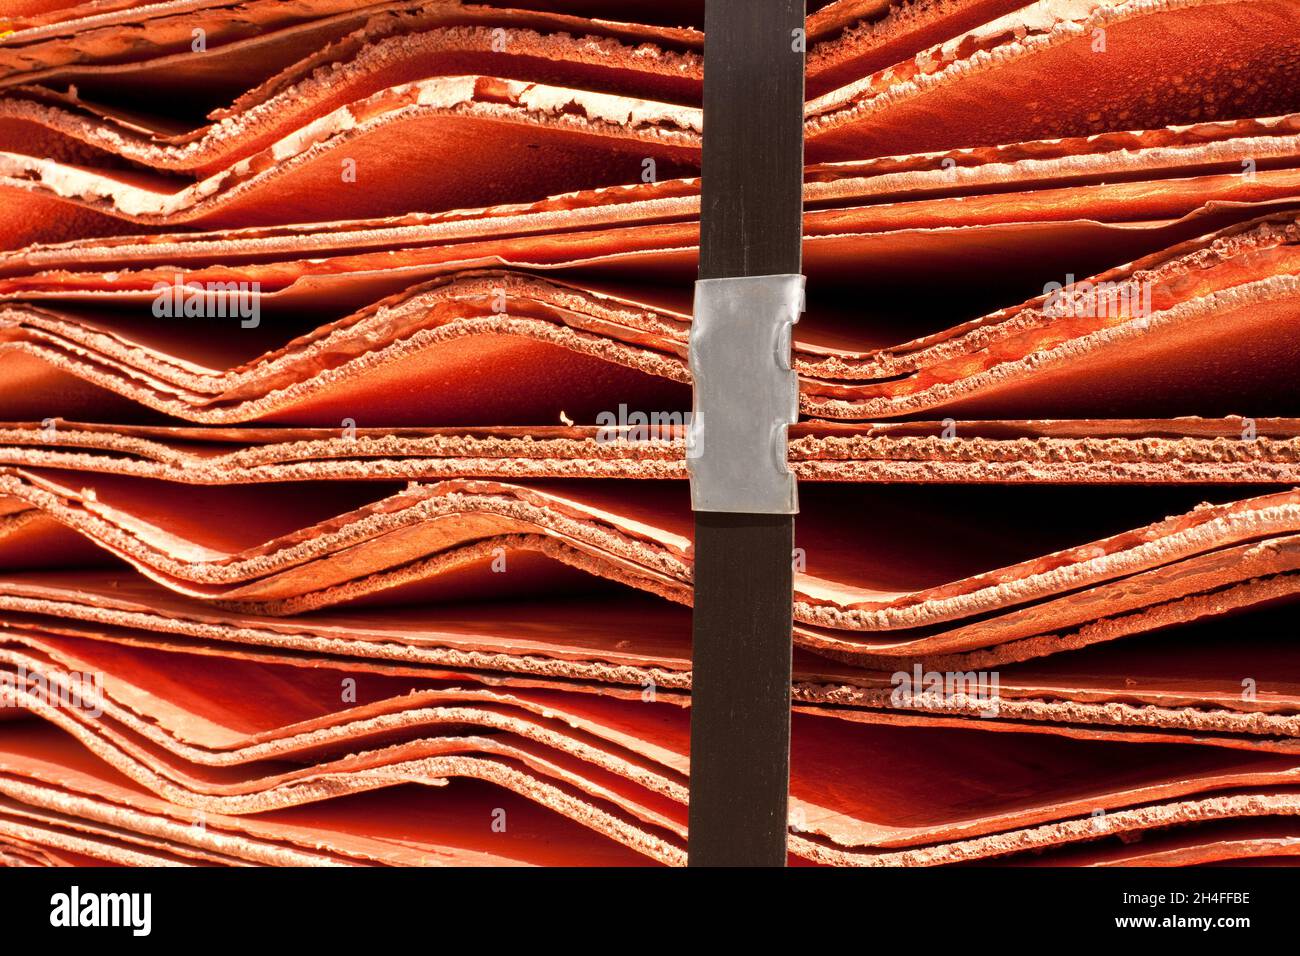 Raw Copper High Resolution Stock Photography and Images - Alamy